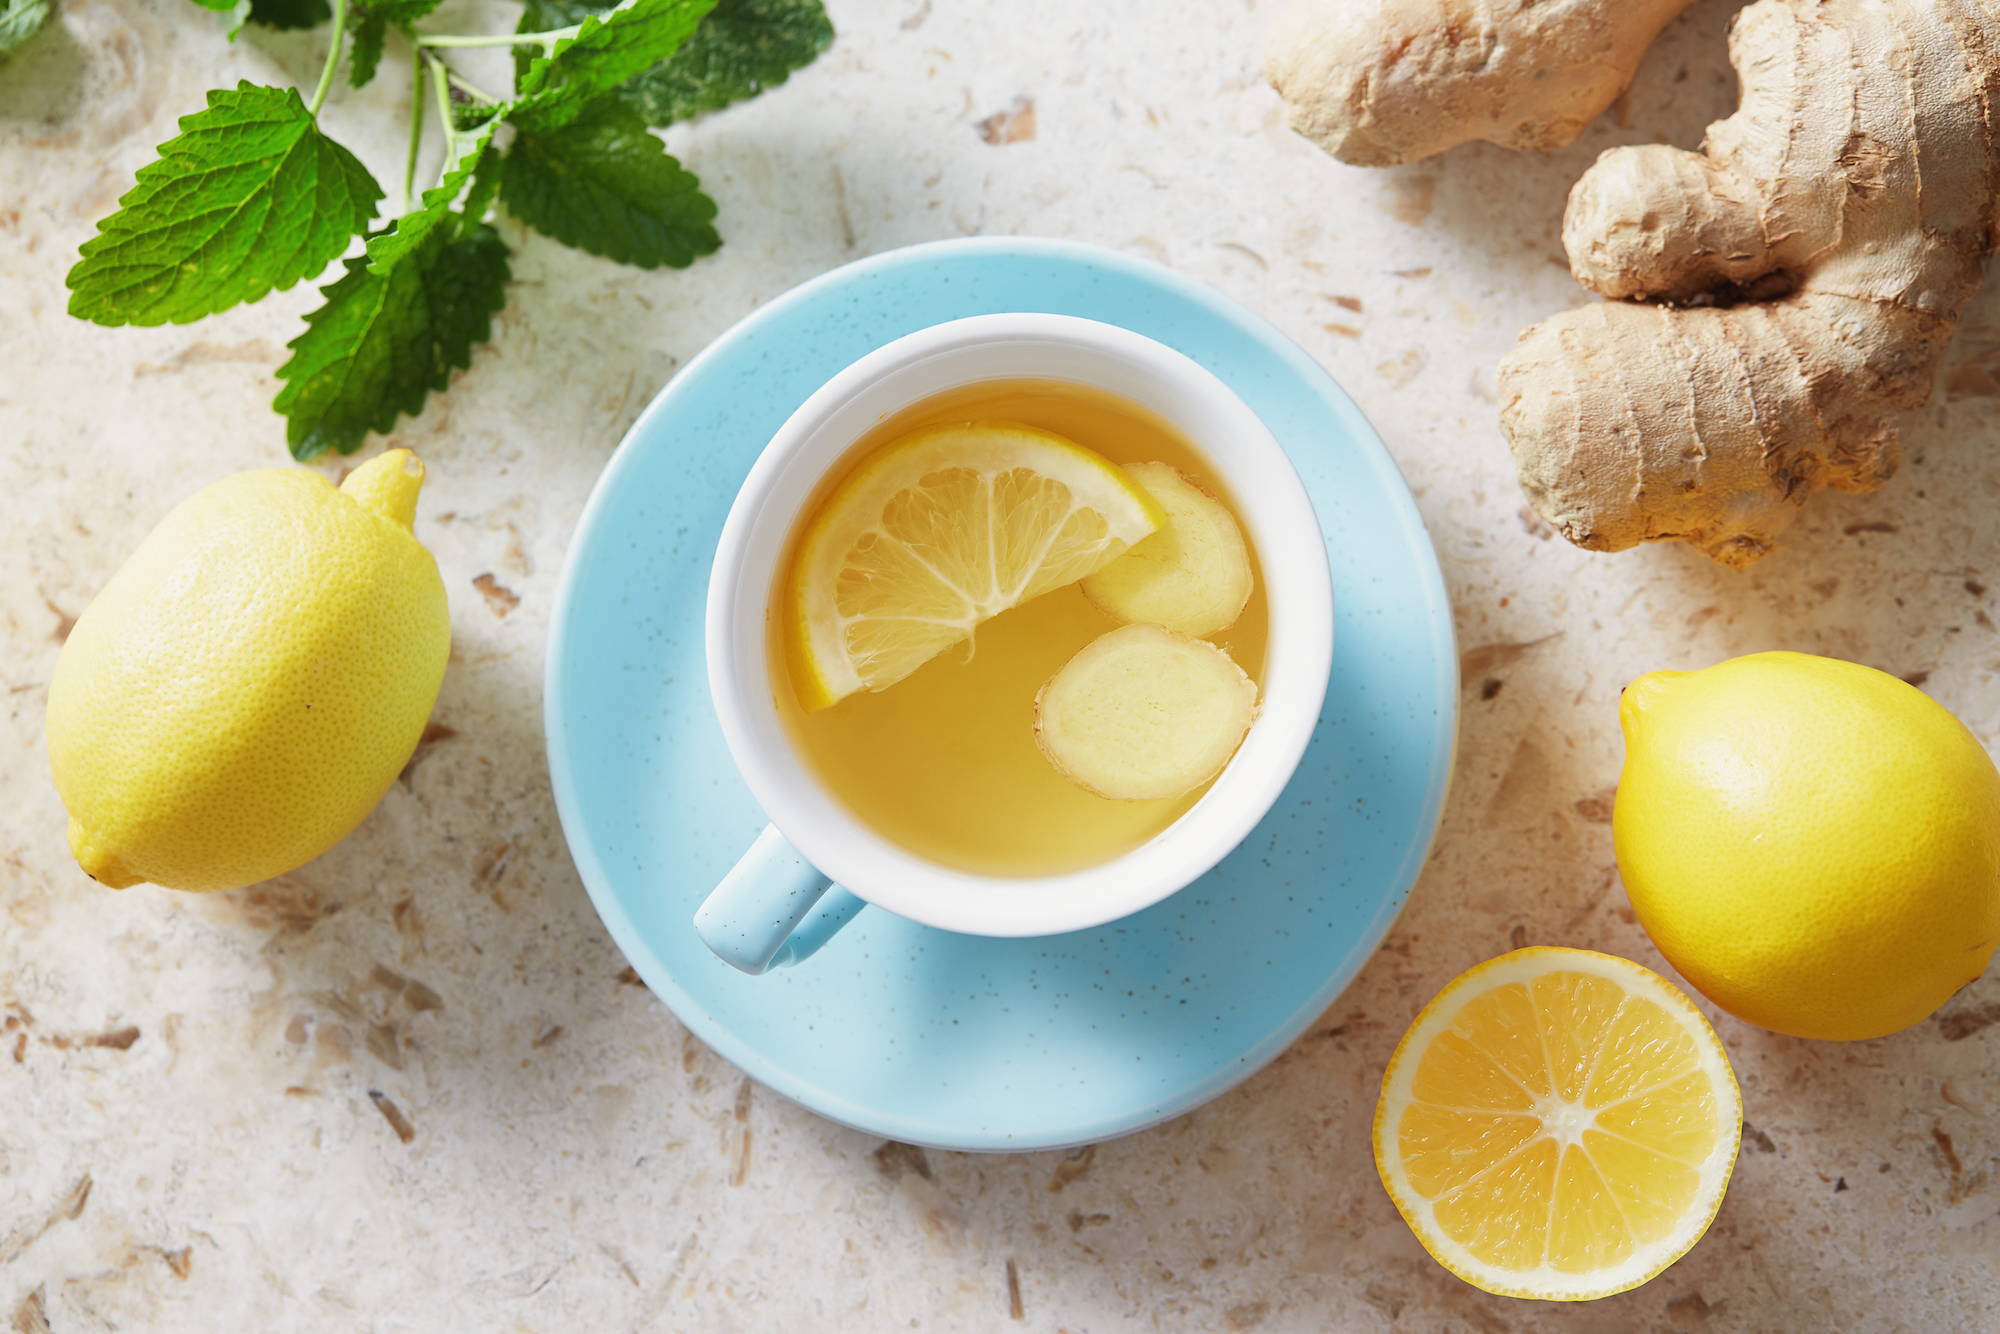 Ginger is one of our top immune boosting foods